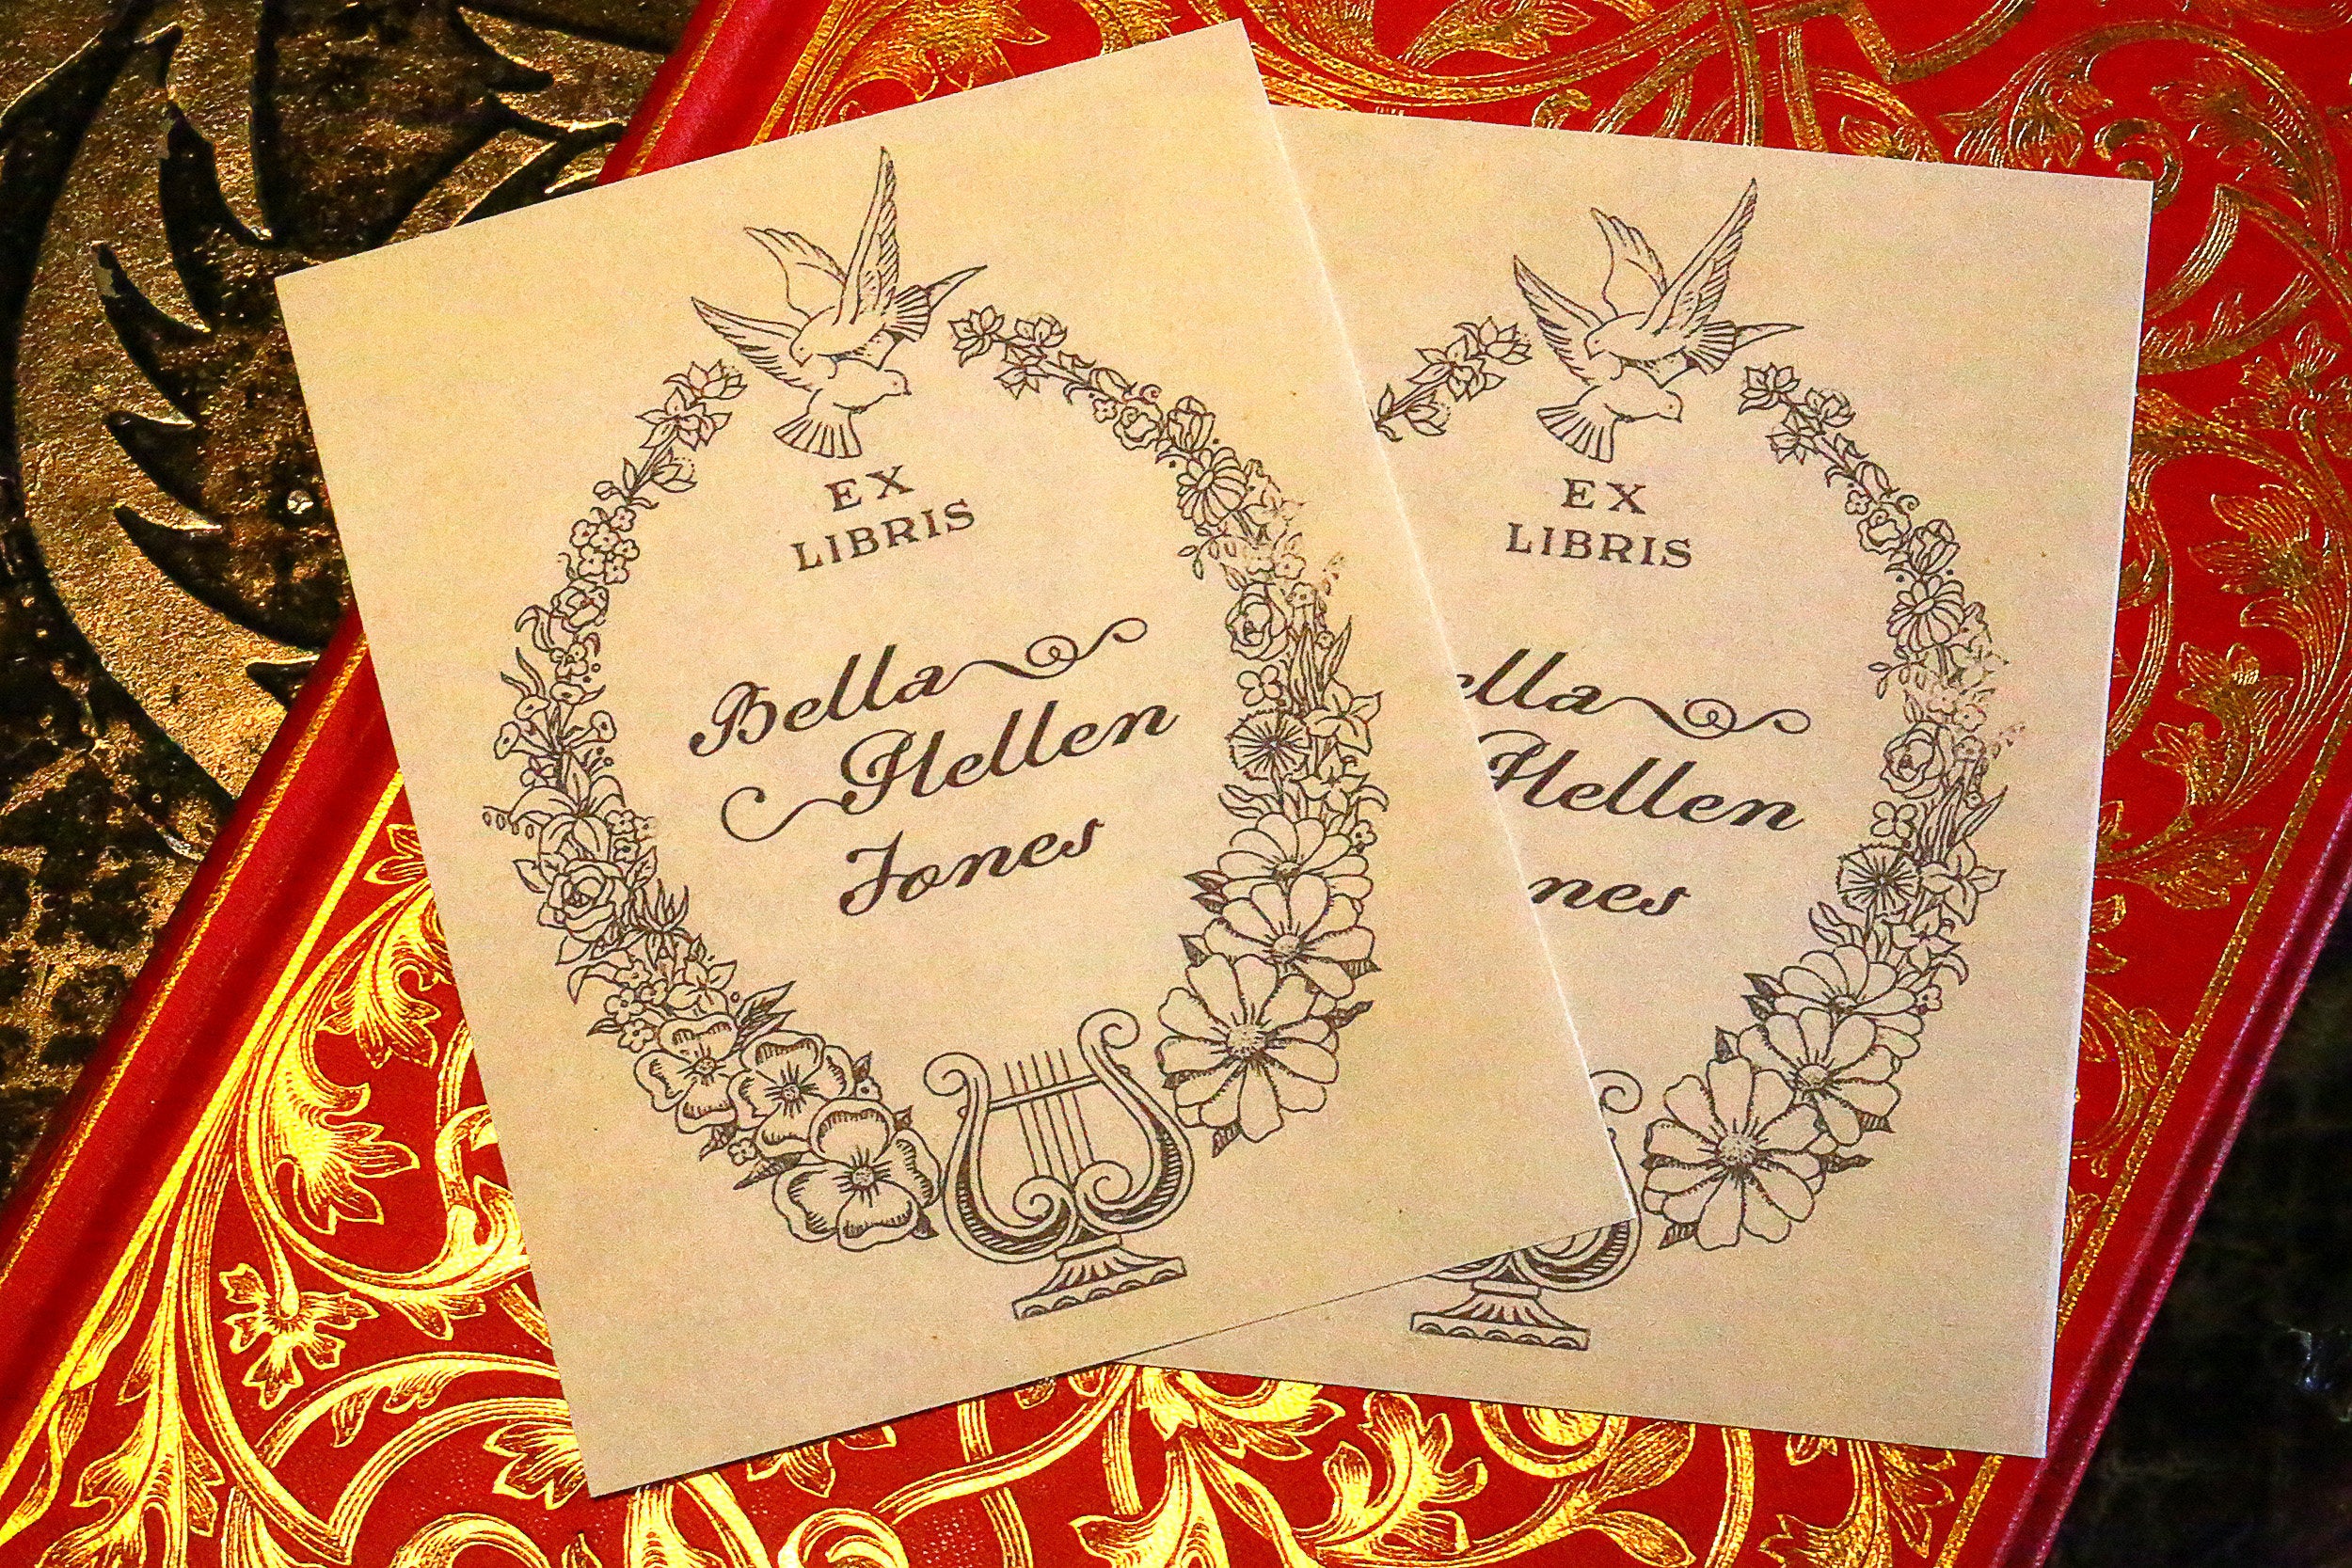 Love Doves, Personalized Ex-Libris Bookplates, Crafted on Traditional Gummed Paper, 3in x 4in, Set of 30